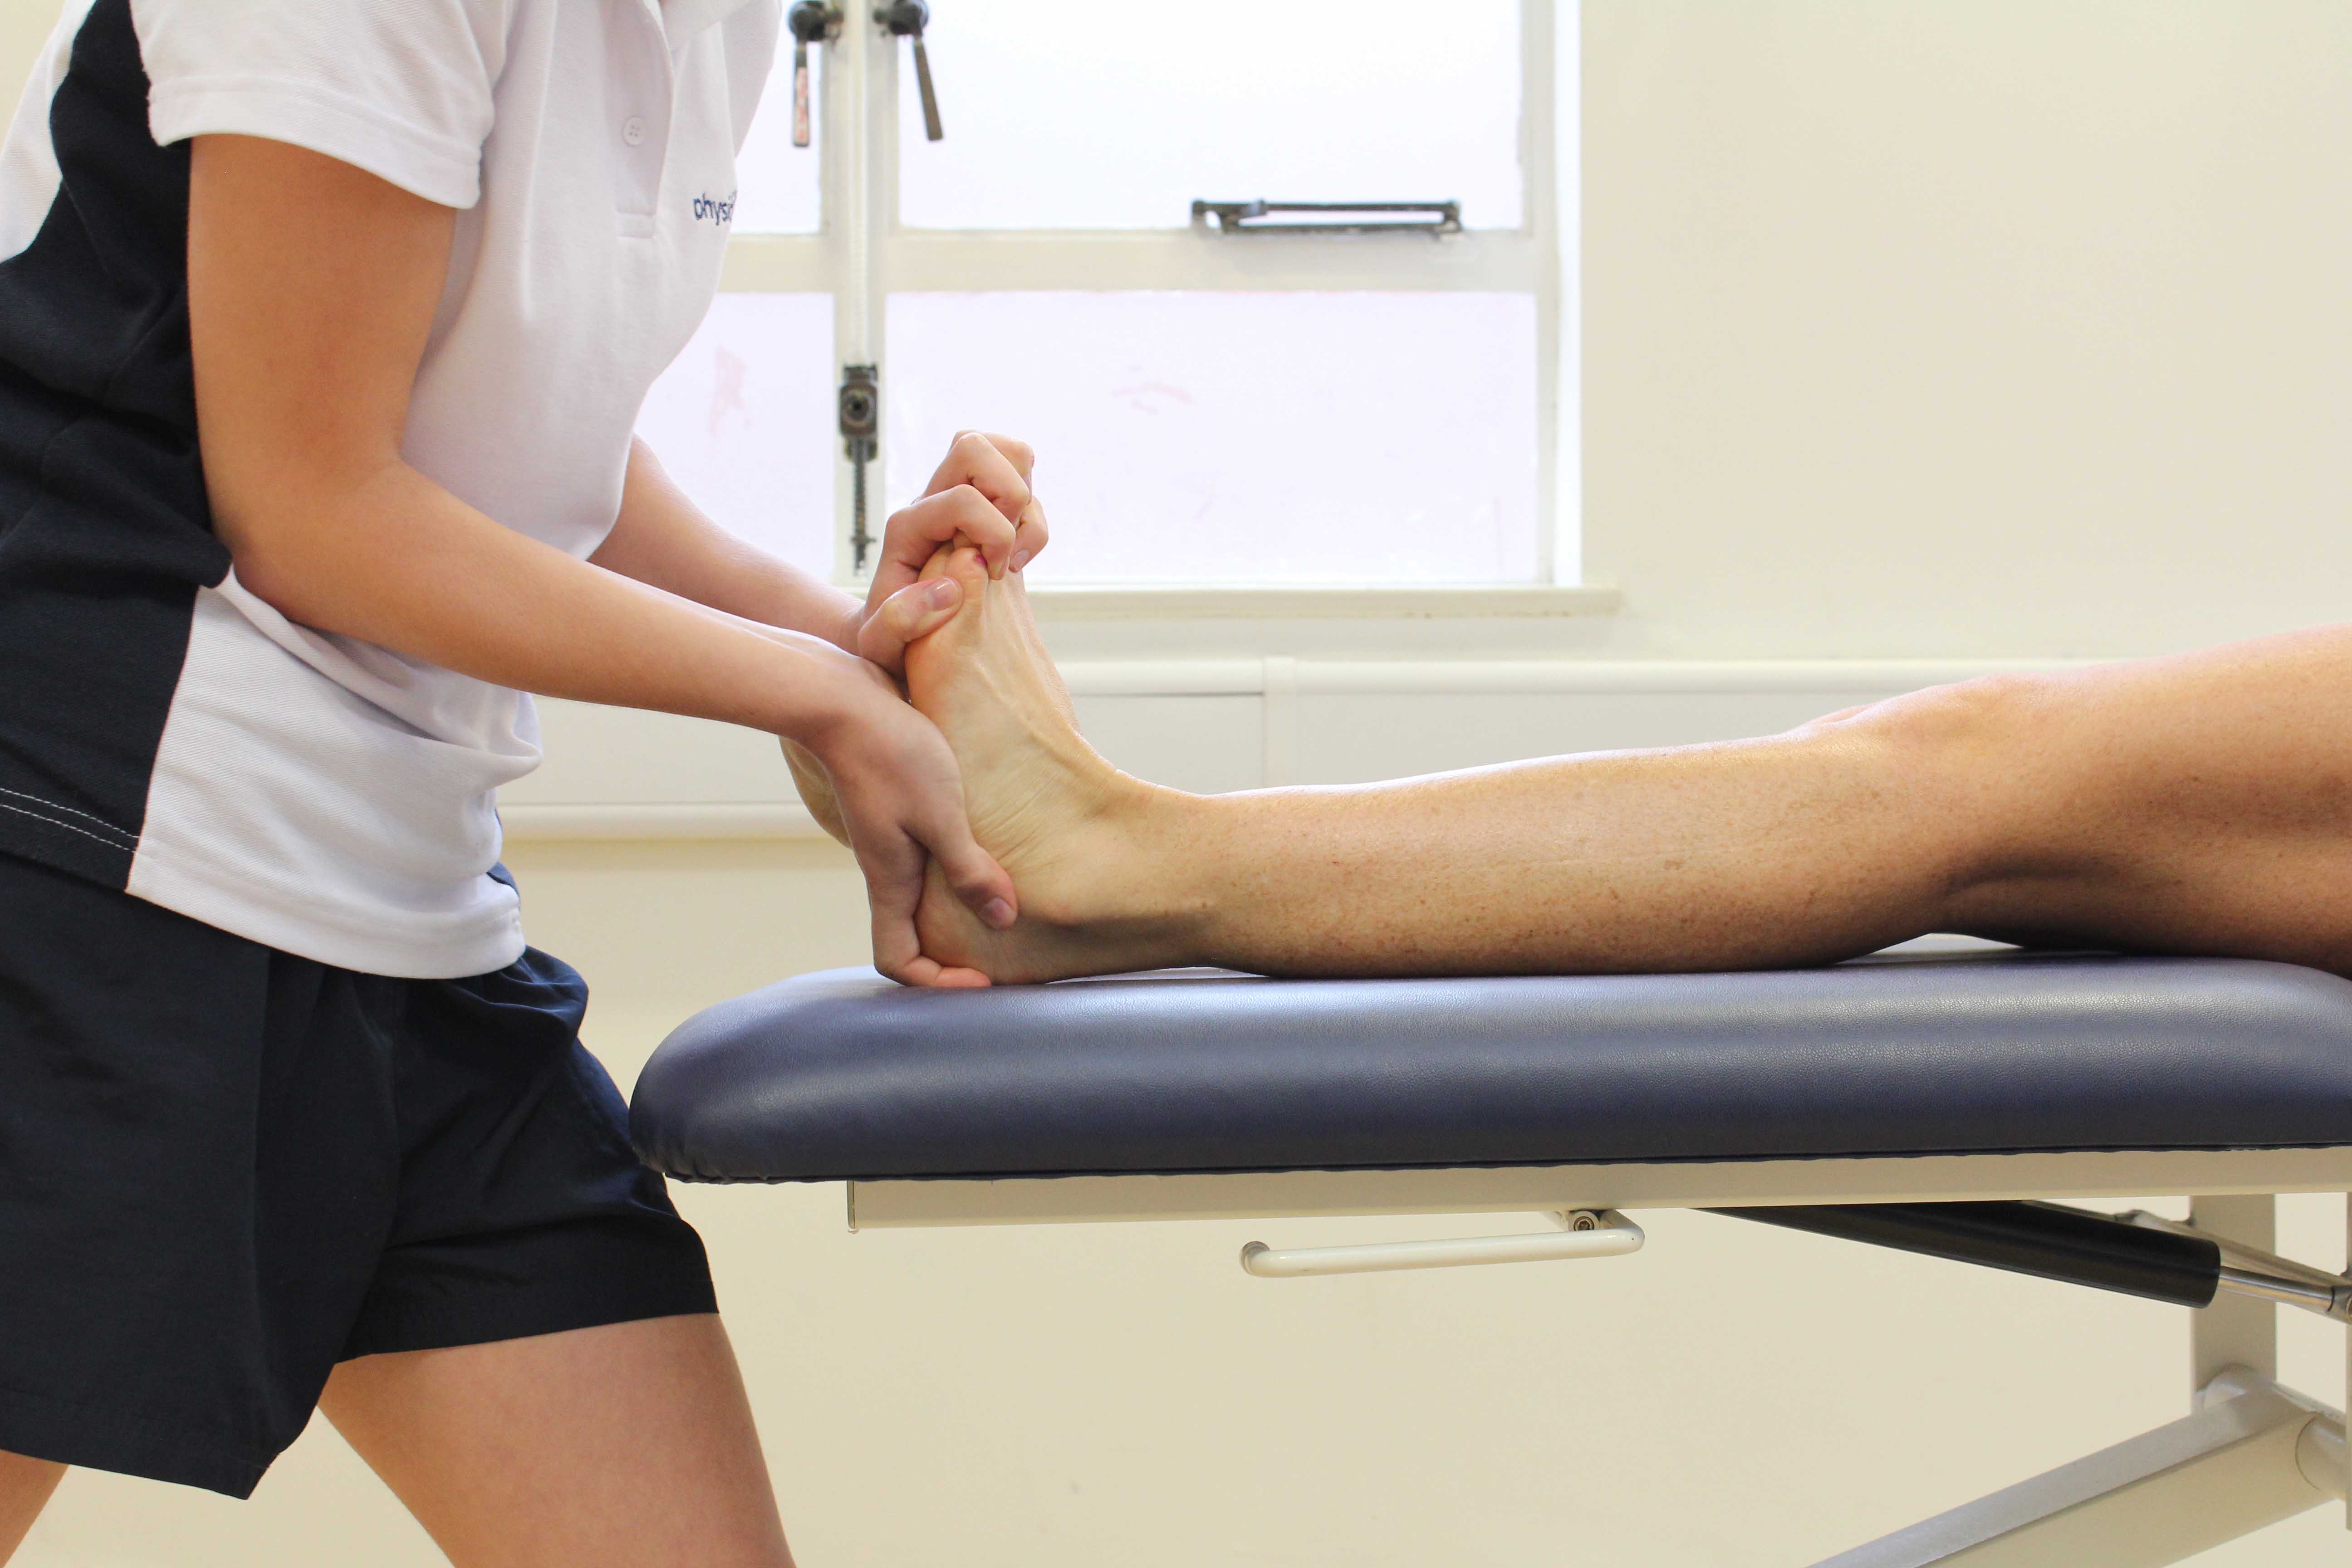 Fractured Ankle - Ankle - Conditions - Musculoskeletal - What We Treat 